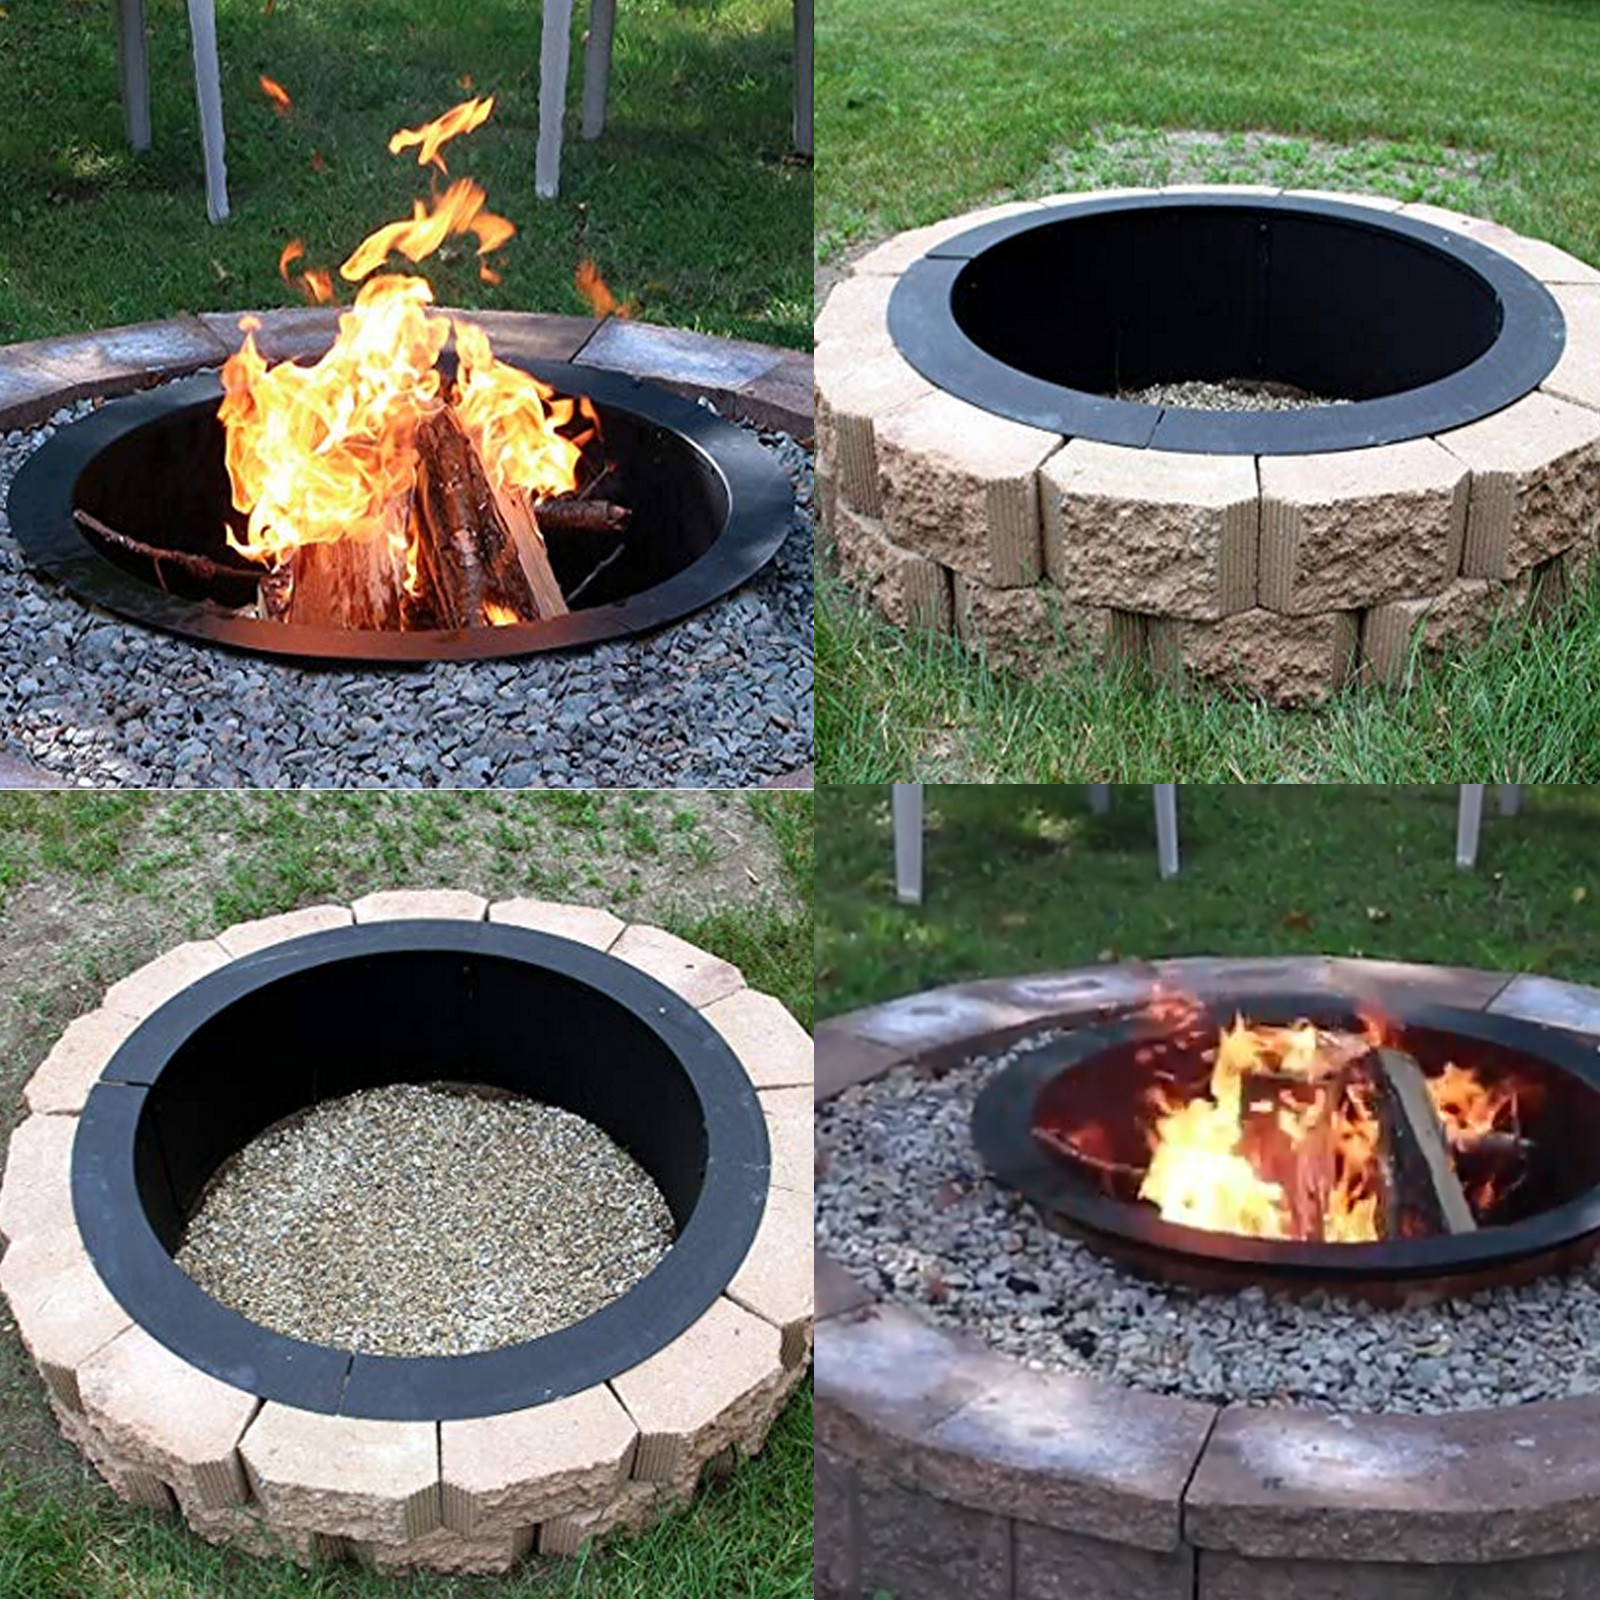 Cooking fire campfire outdoor ring pit gear grill guide open swing set camp camping bbq equipment rotisserie cowboy setups portable